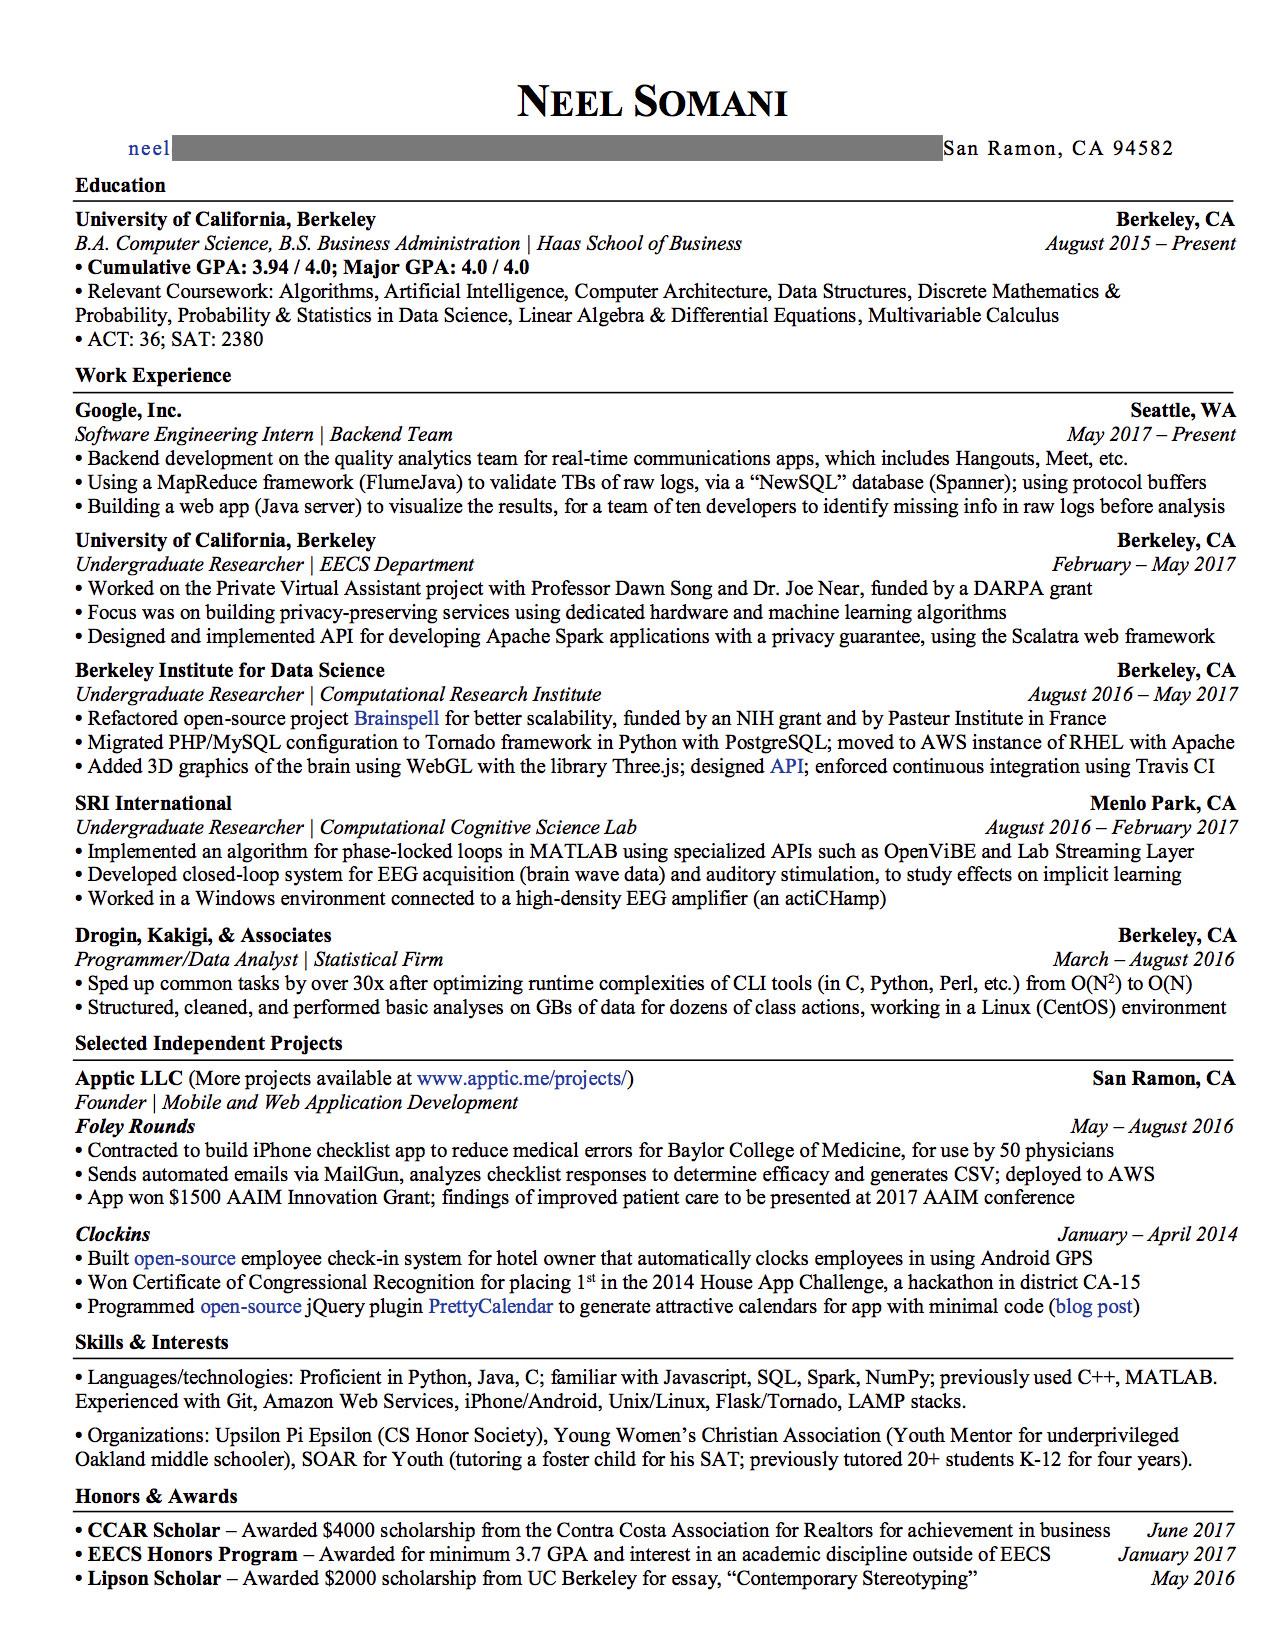 Cracking the Coding Interview Resume Template How to Craft A Winning Resume (& Land An Offer From Google …